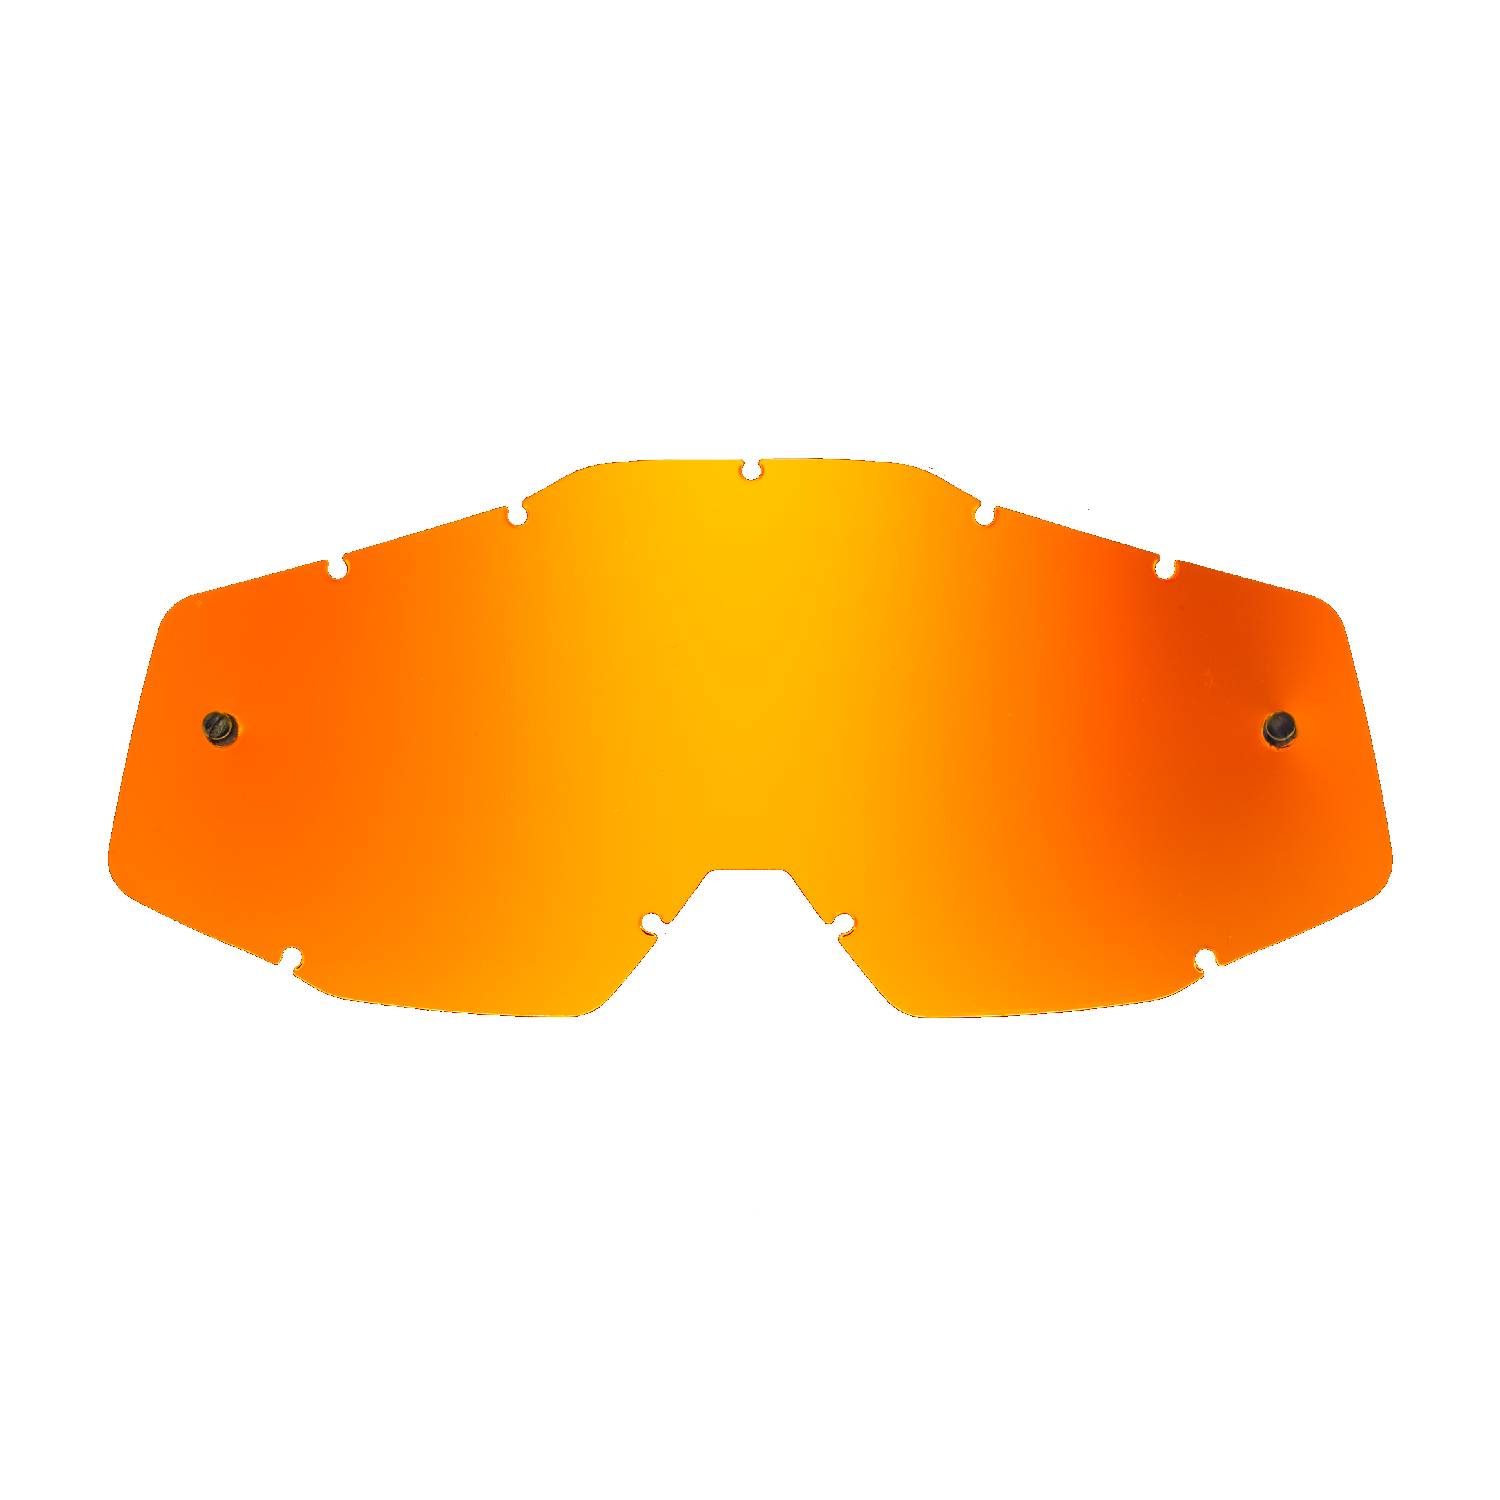 orange-toned mirrored replacement lenses for goggles compatible for FMF POWERBOMB/POWERCORE goggle